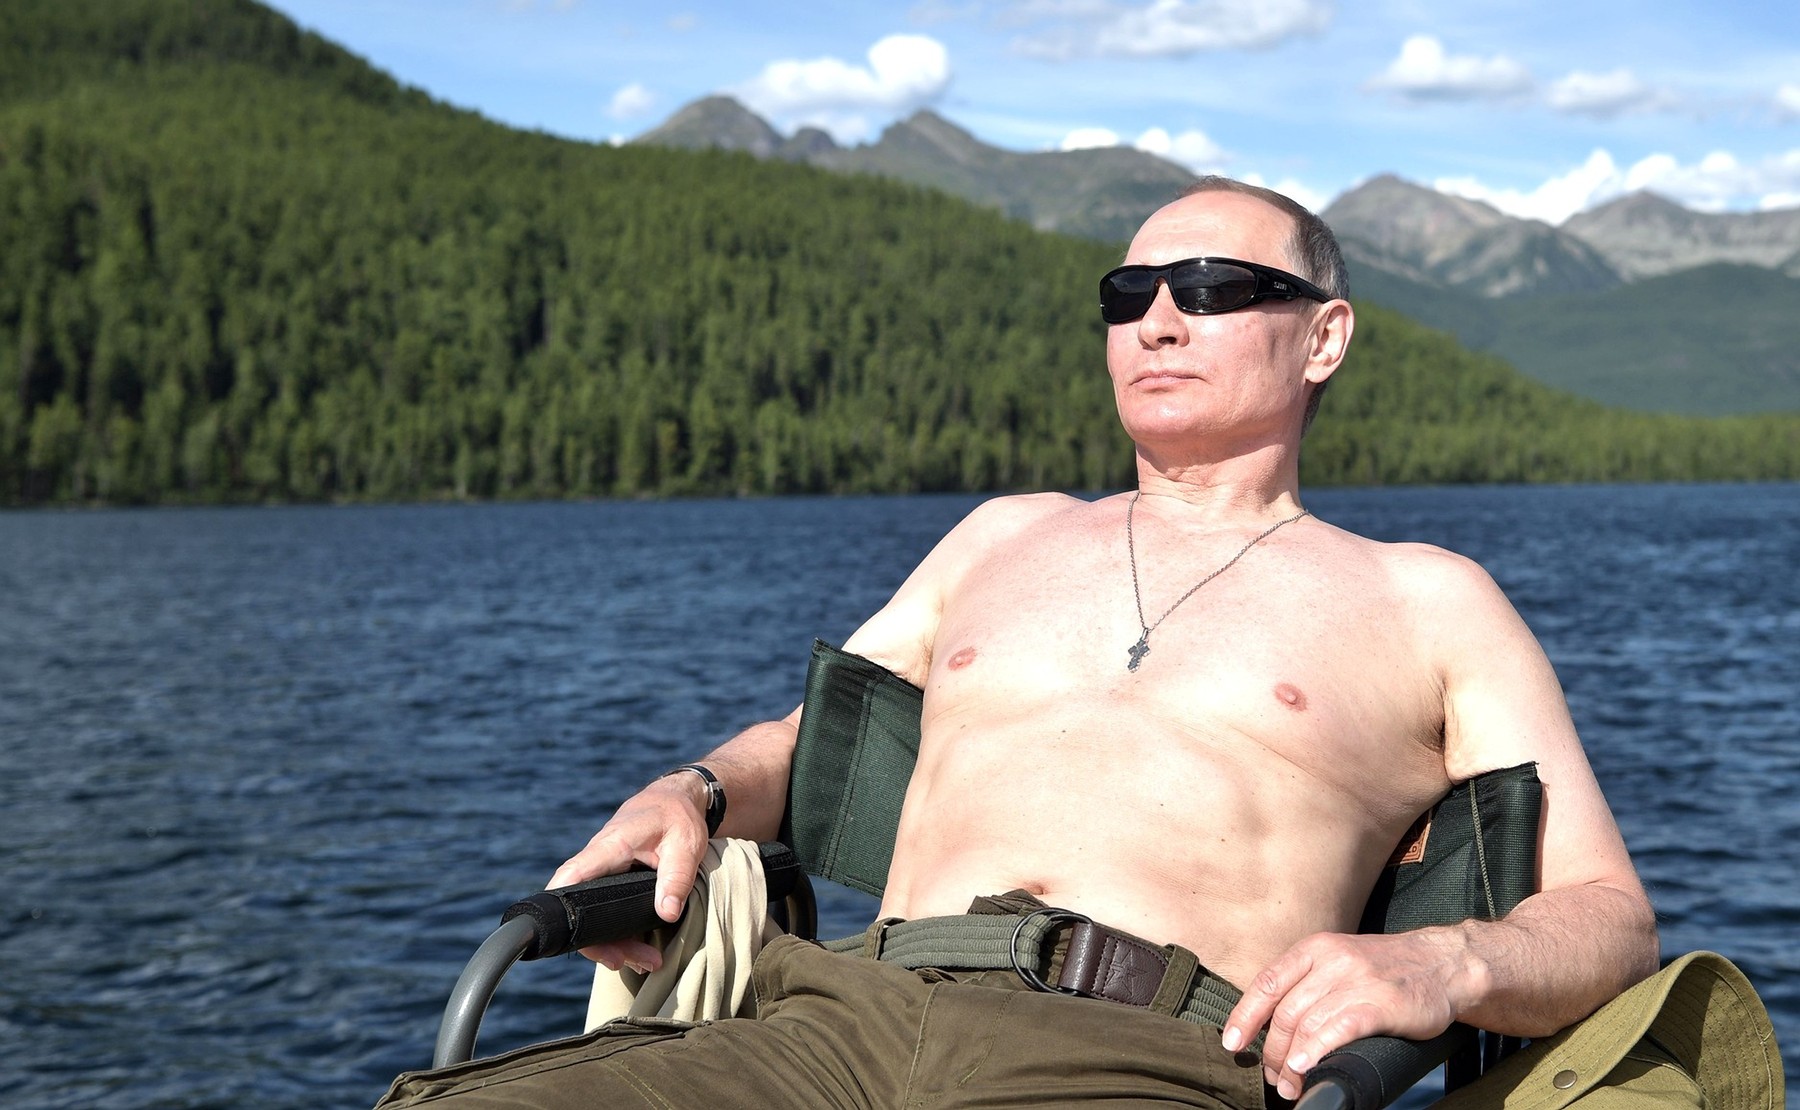 August 3, 2017 - Tyva, Tyva, Russia - Russian President Vladimir Putin relaxes in the sun shirtless after fishing during a three-day fishing and hunting adventure in the Siberian wilderness near the Mongolian border August 1-3, 2017 in the Tyva Republic, Russia.,Image: 344546406, License: Rights-managed, Restrictions: , Model Release: no, Credit line: Profimedia